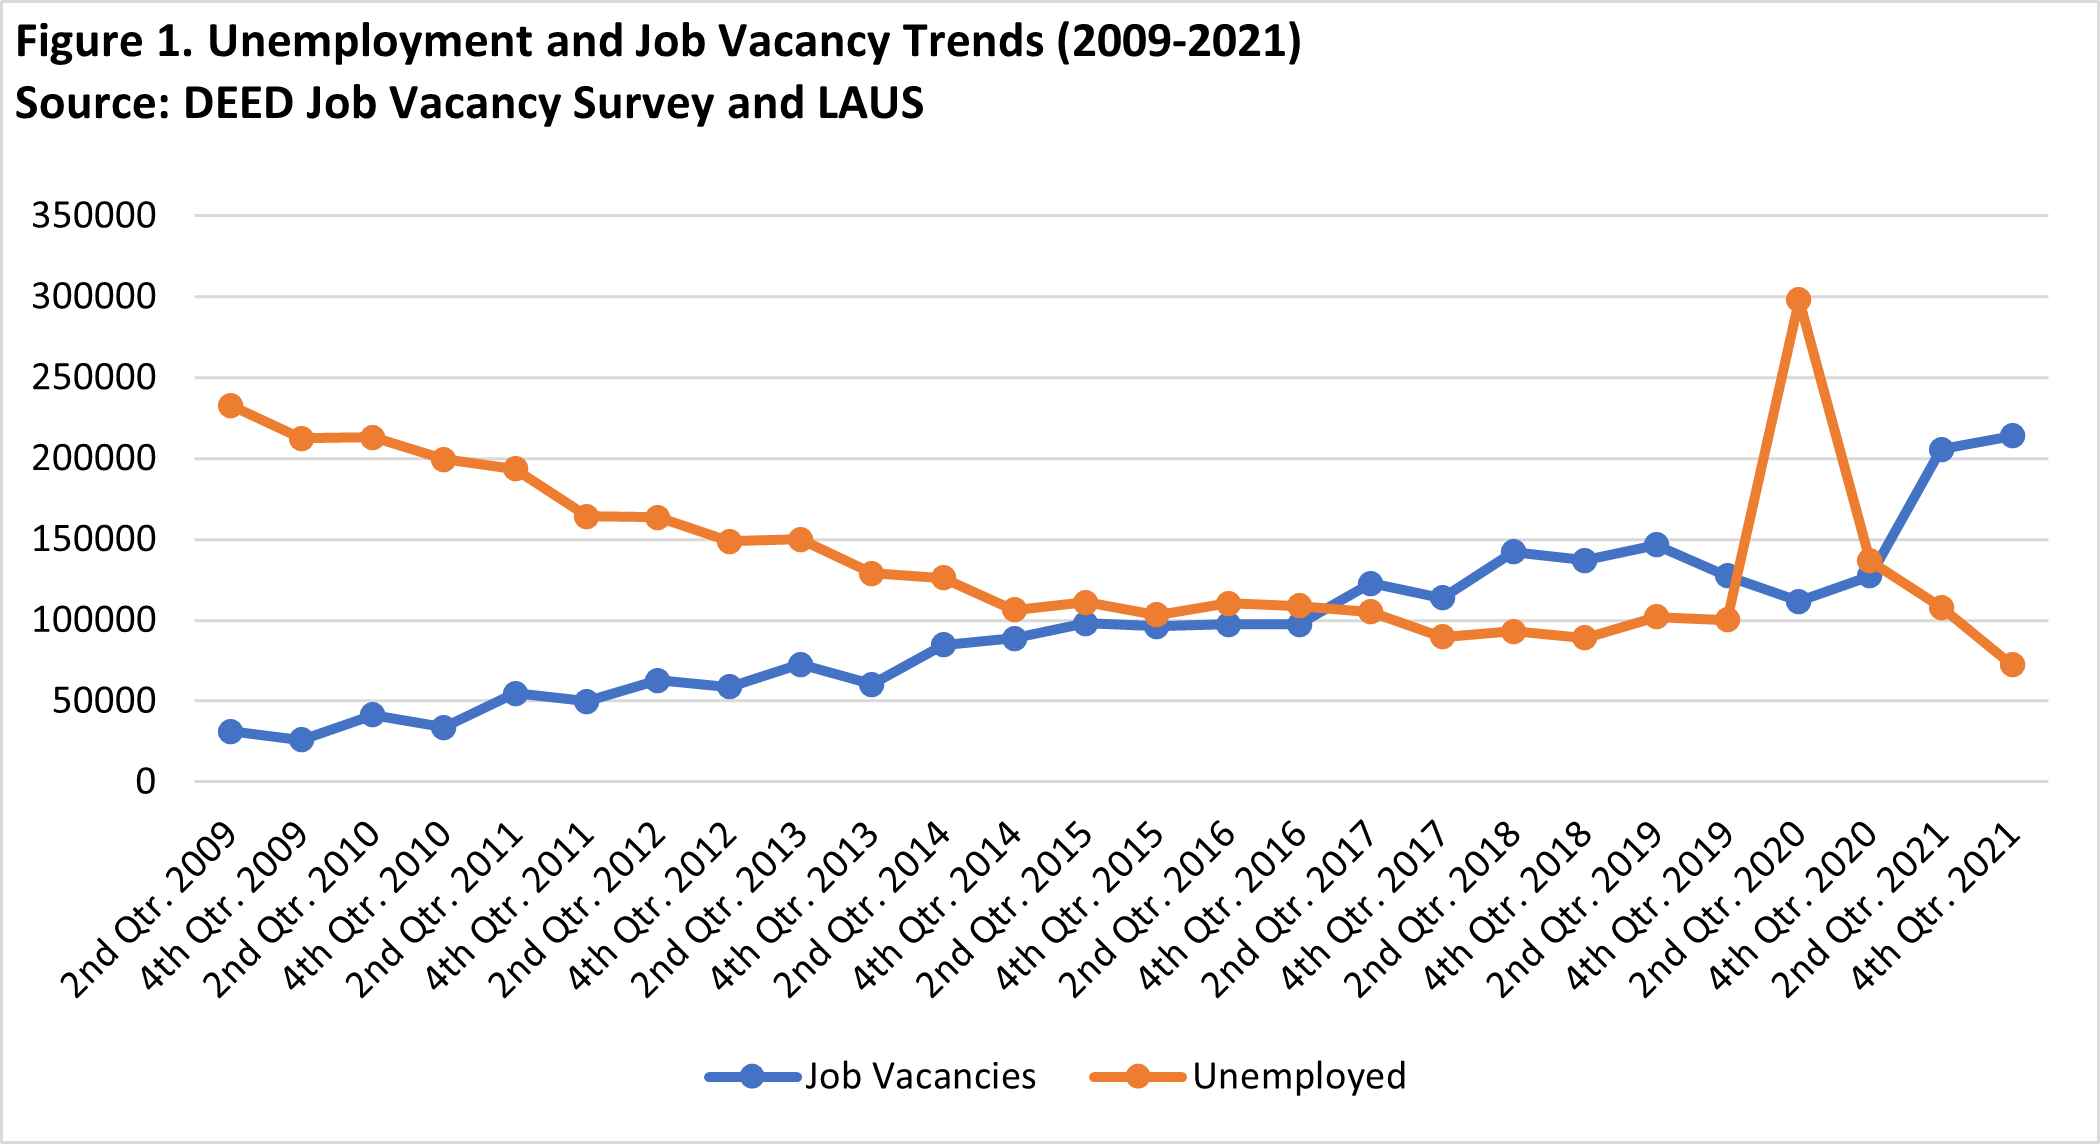 Unemployment and Job Vacancy Trends